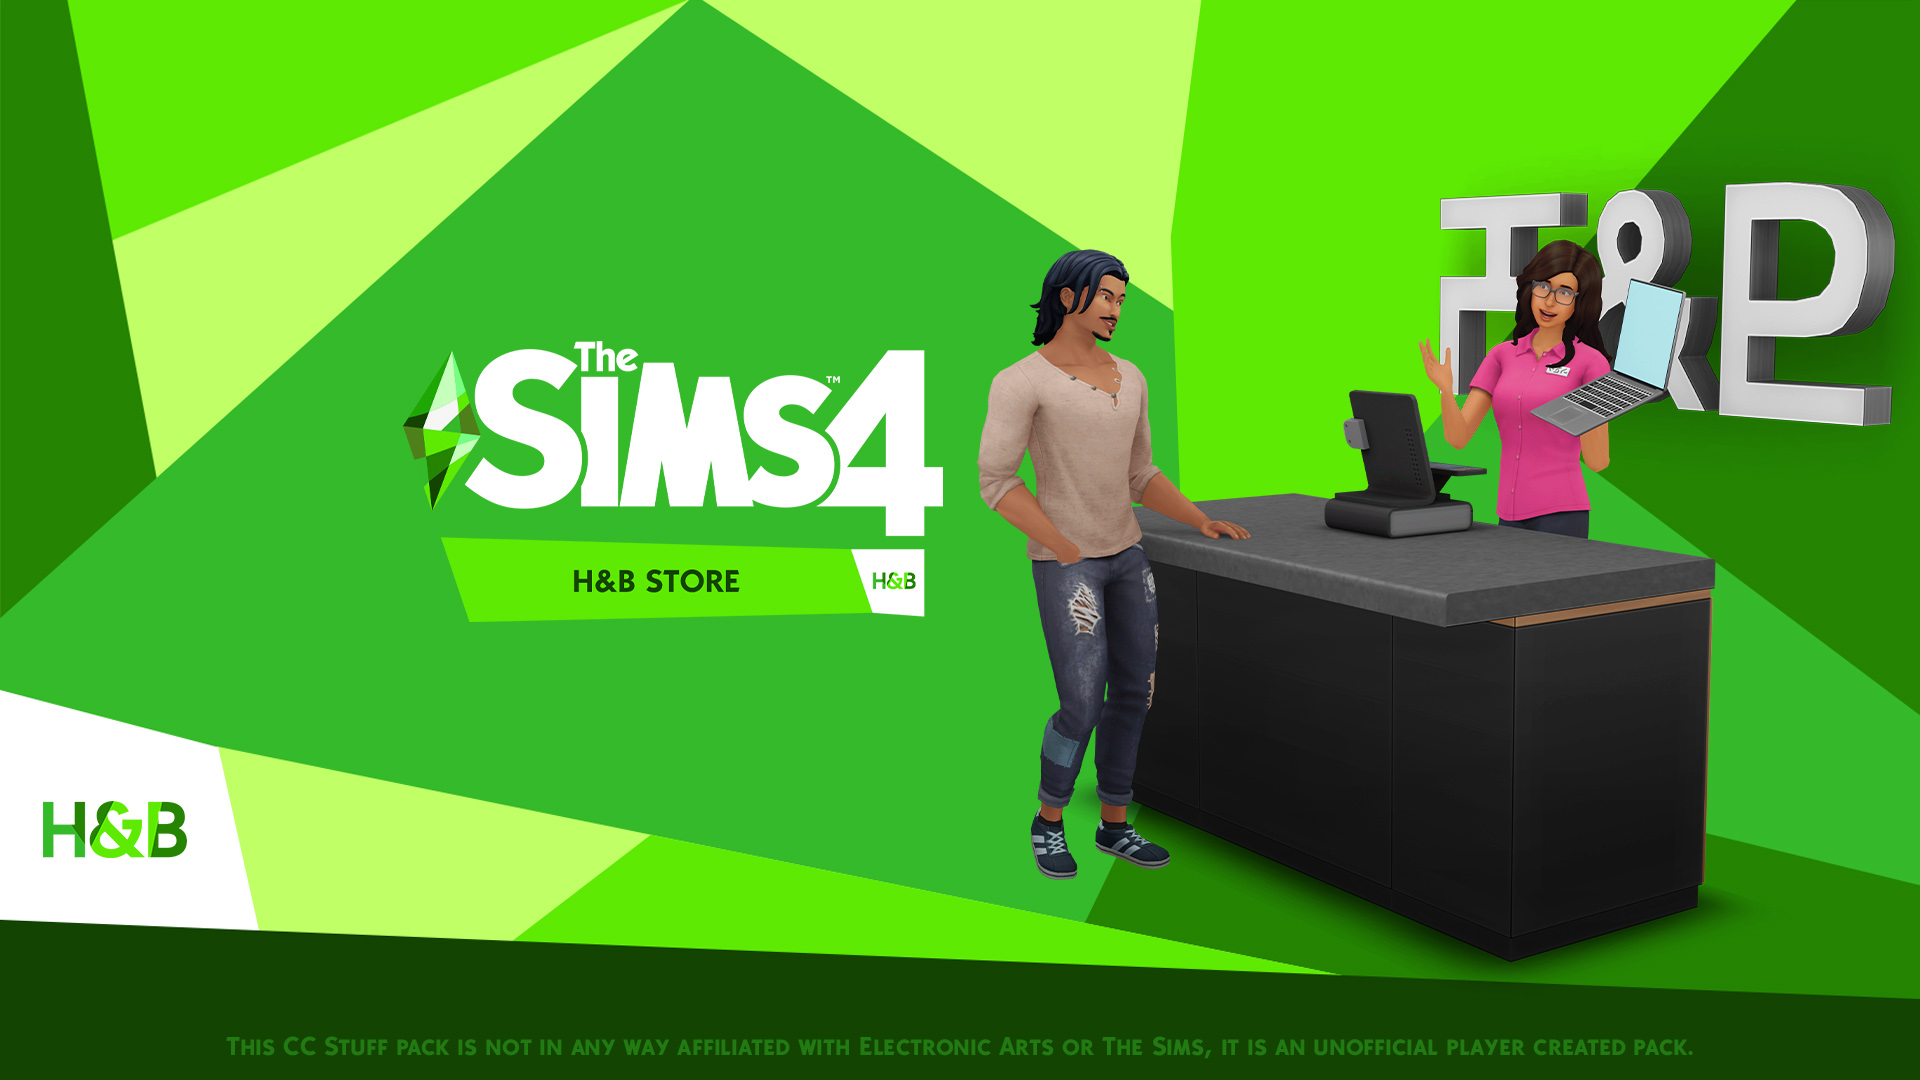 MUST HAVE FREE STUFF PACKS (The Sims 4 mods) 